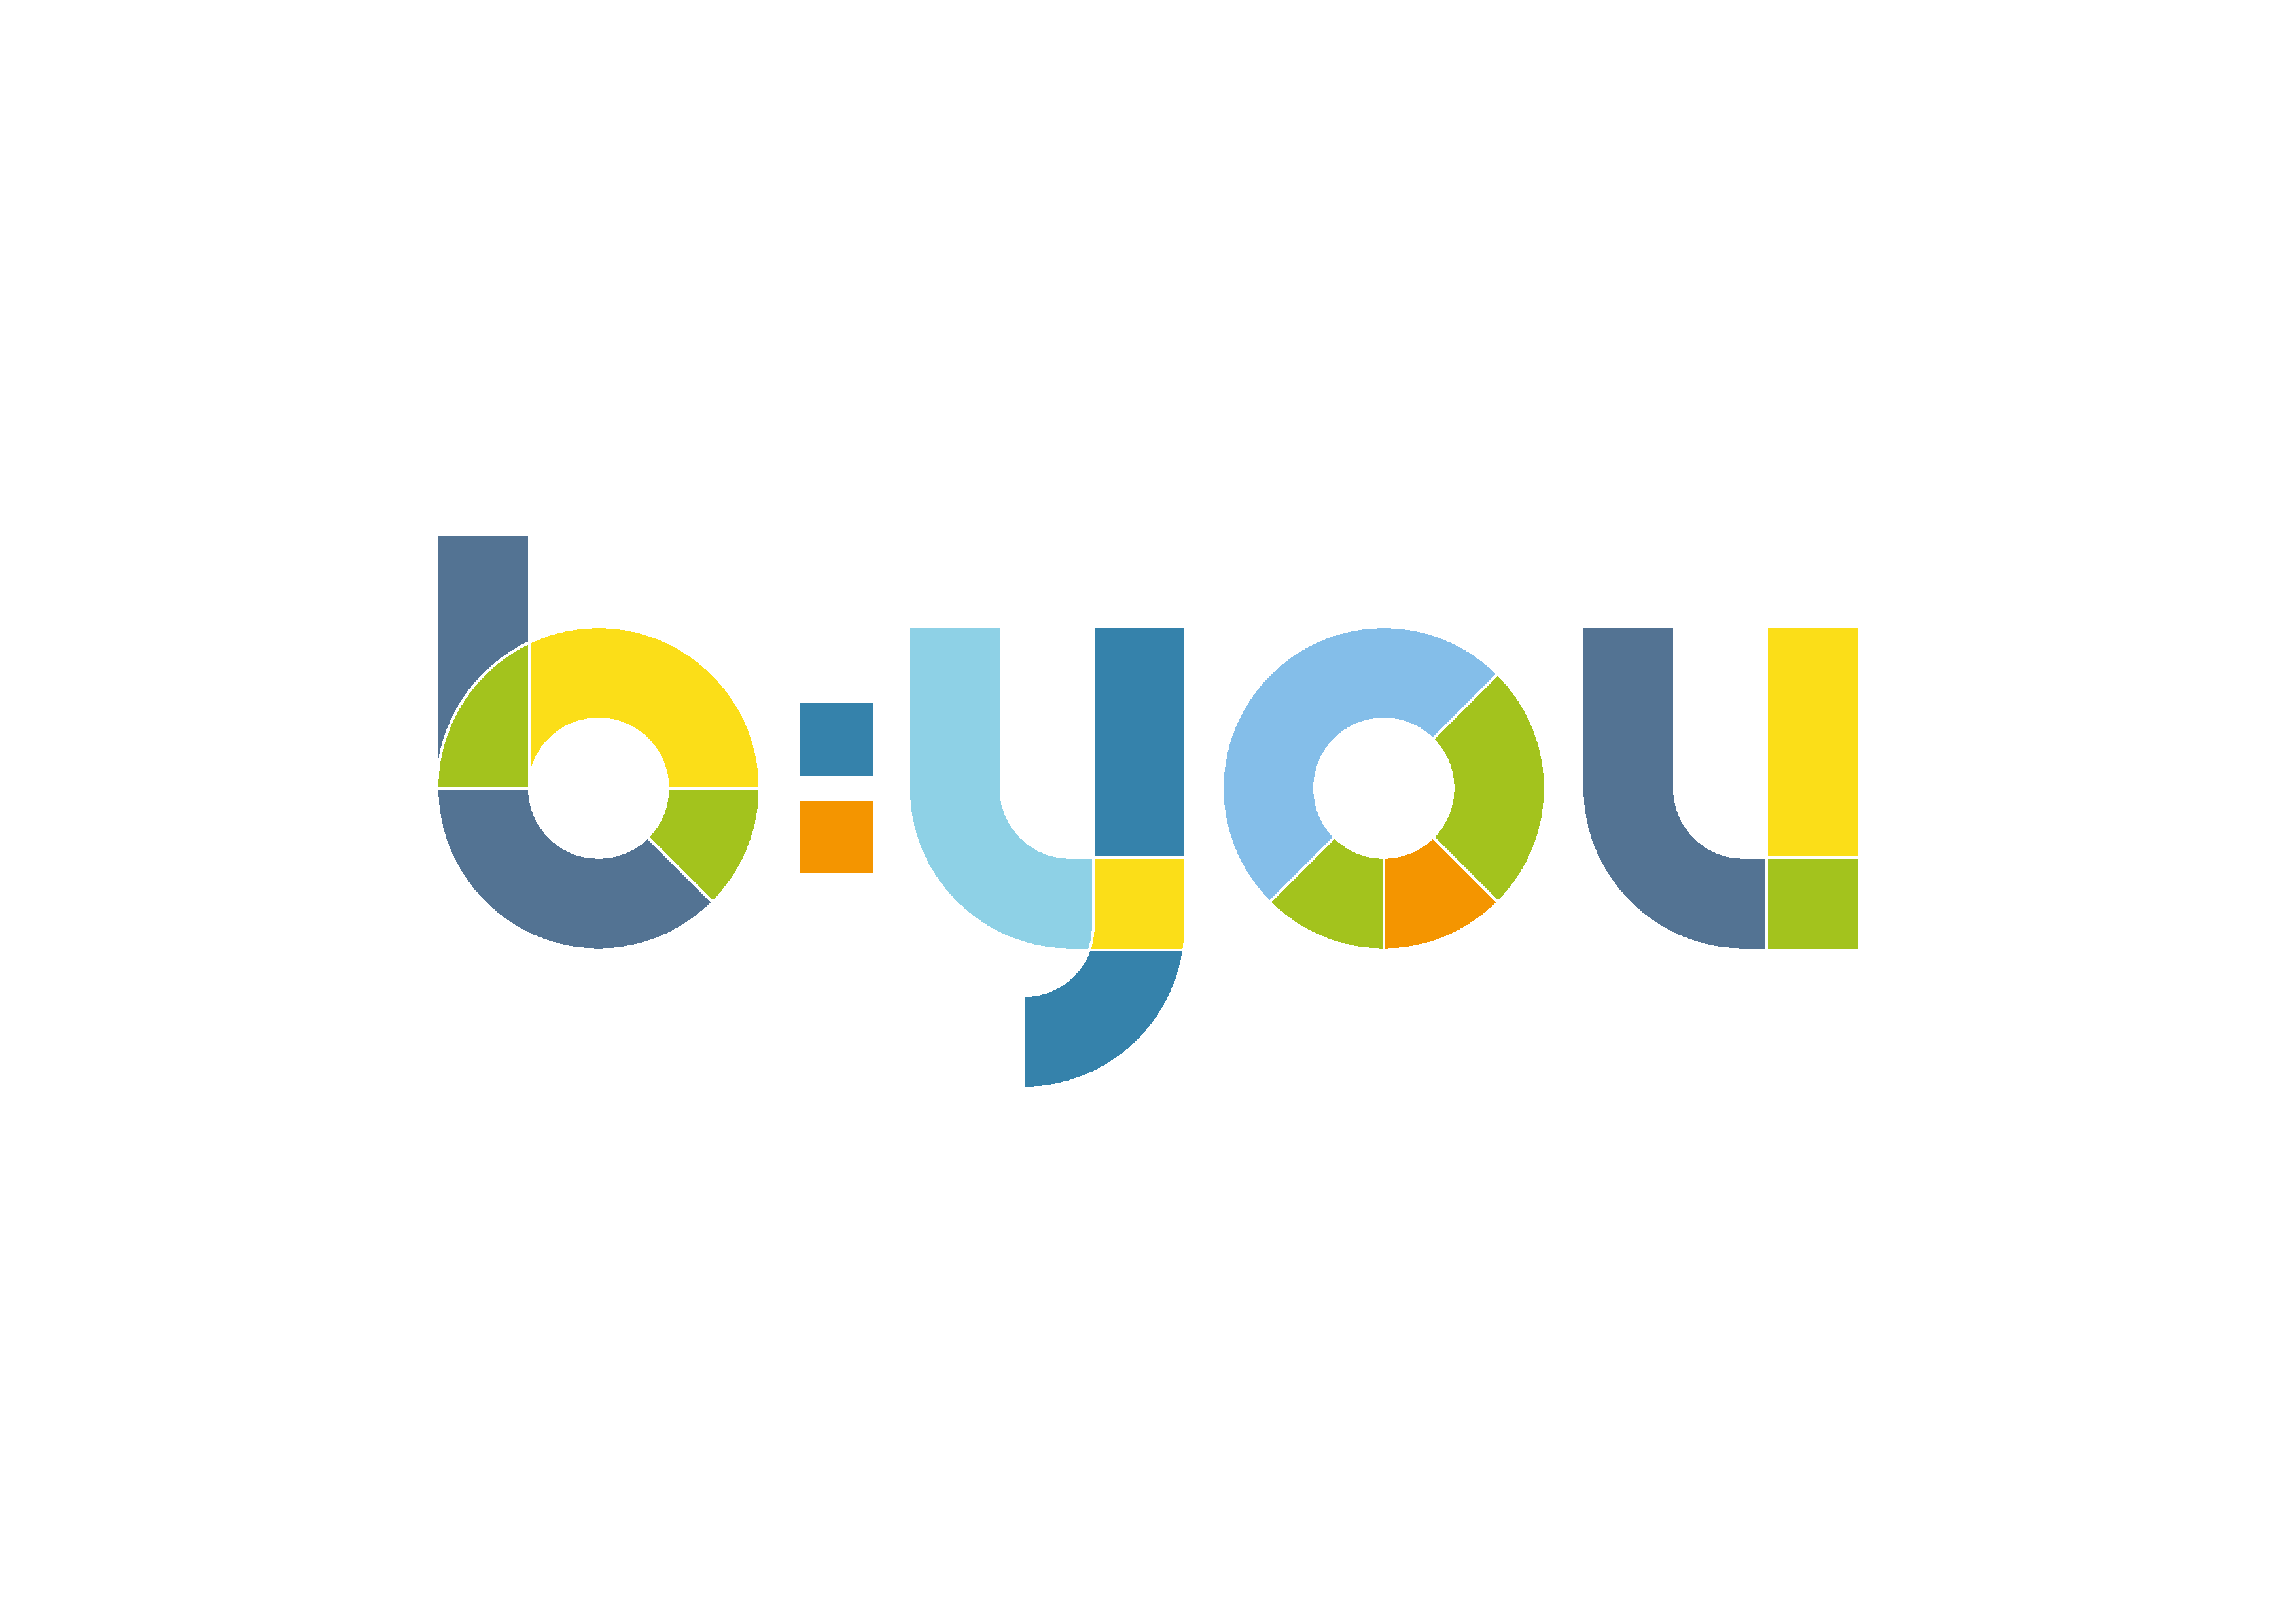 b:you